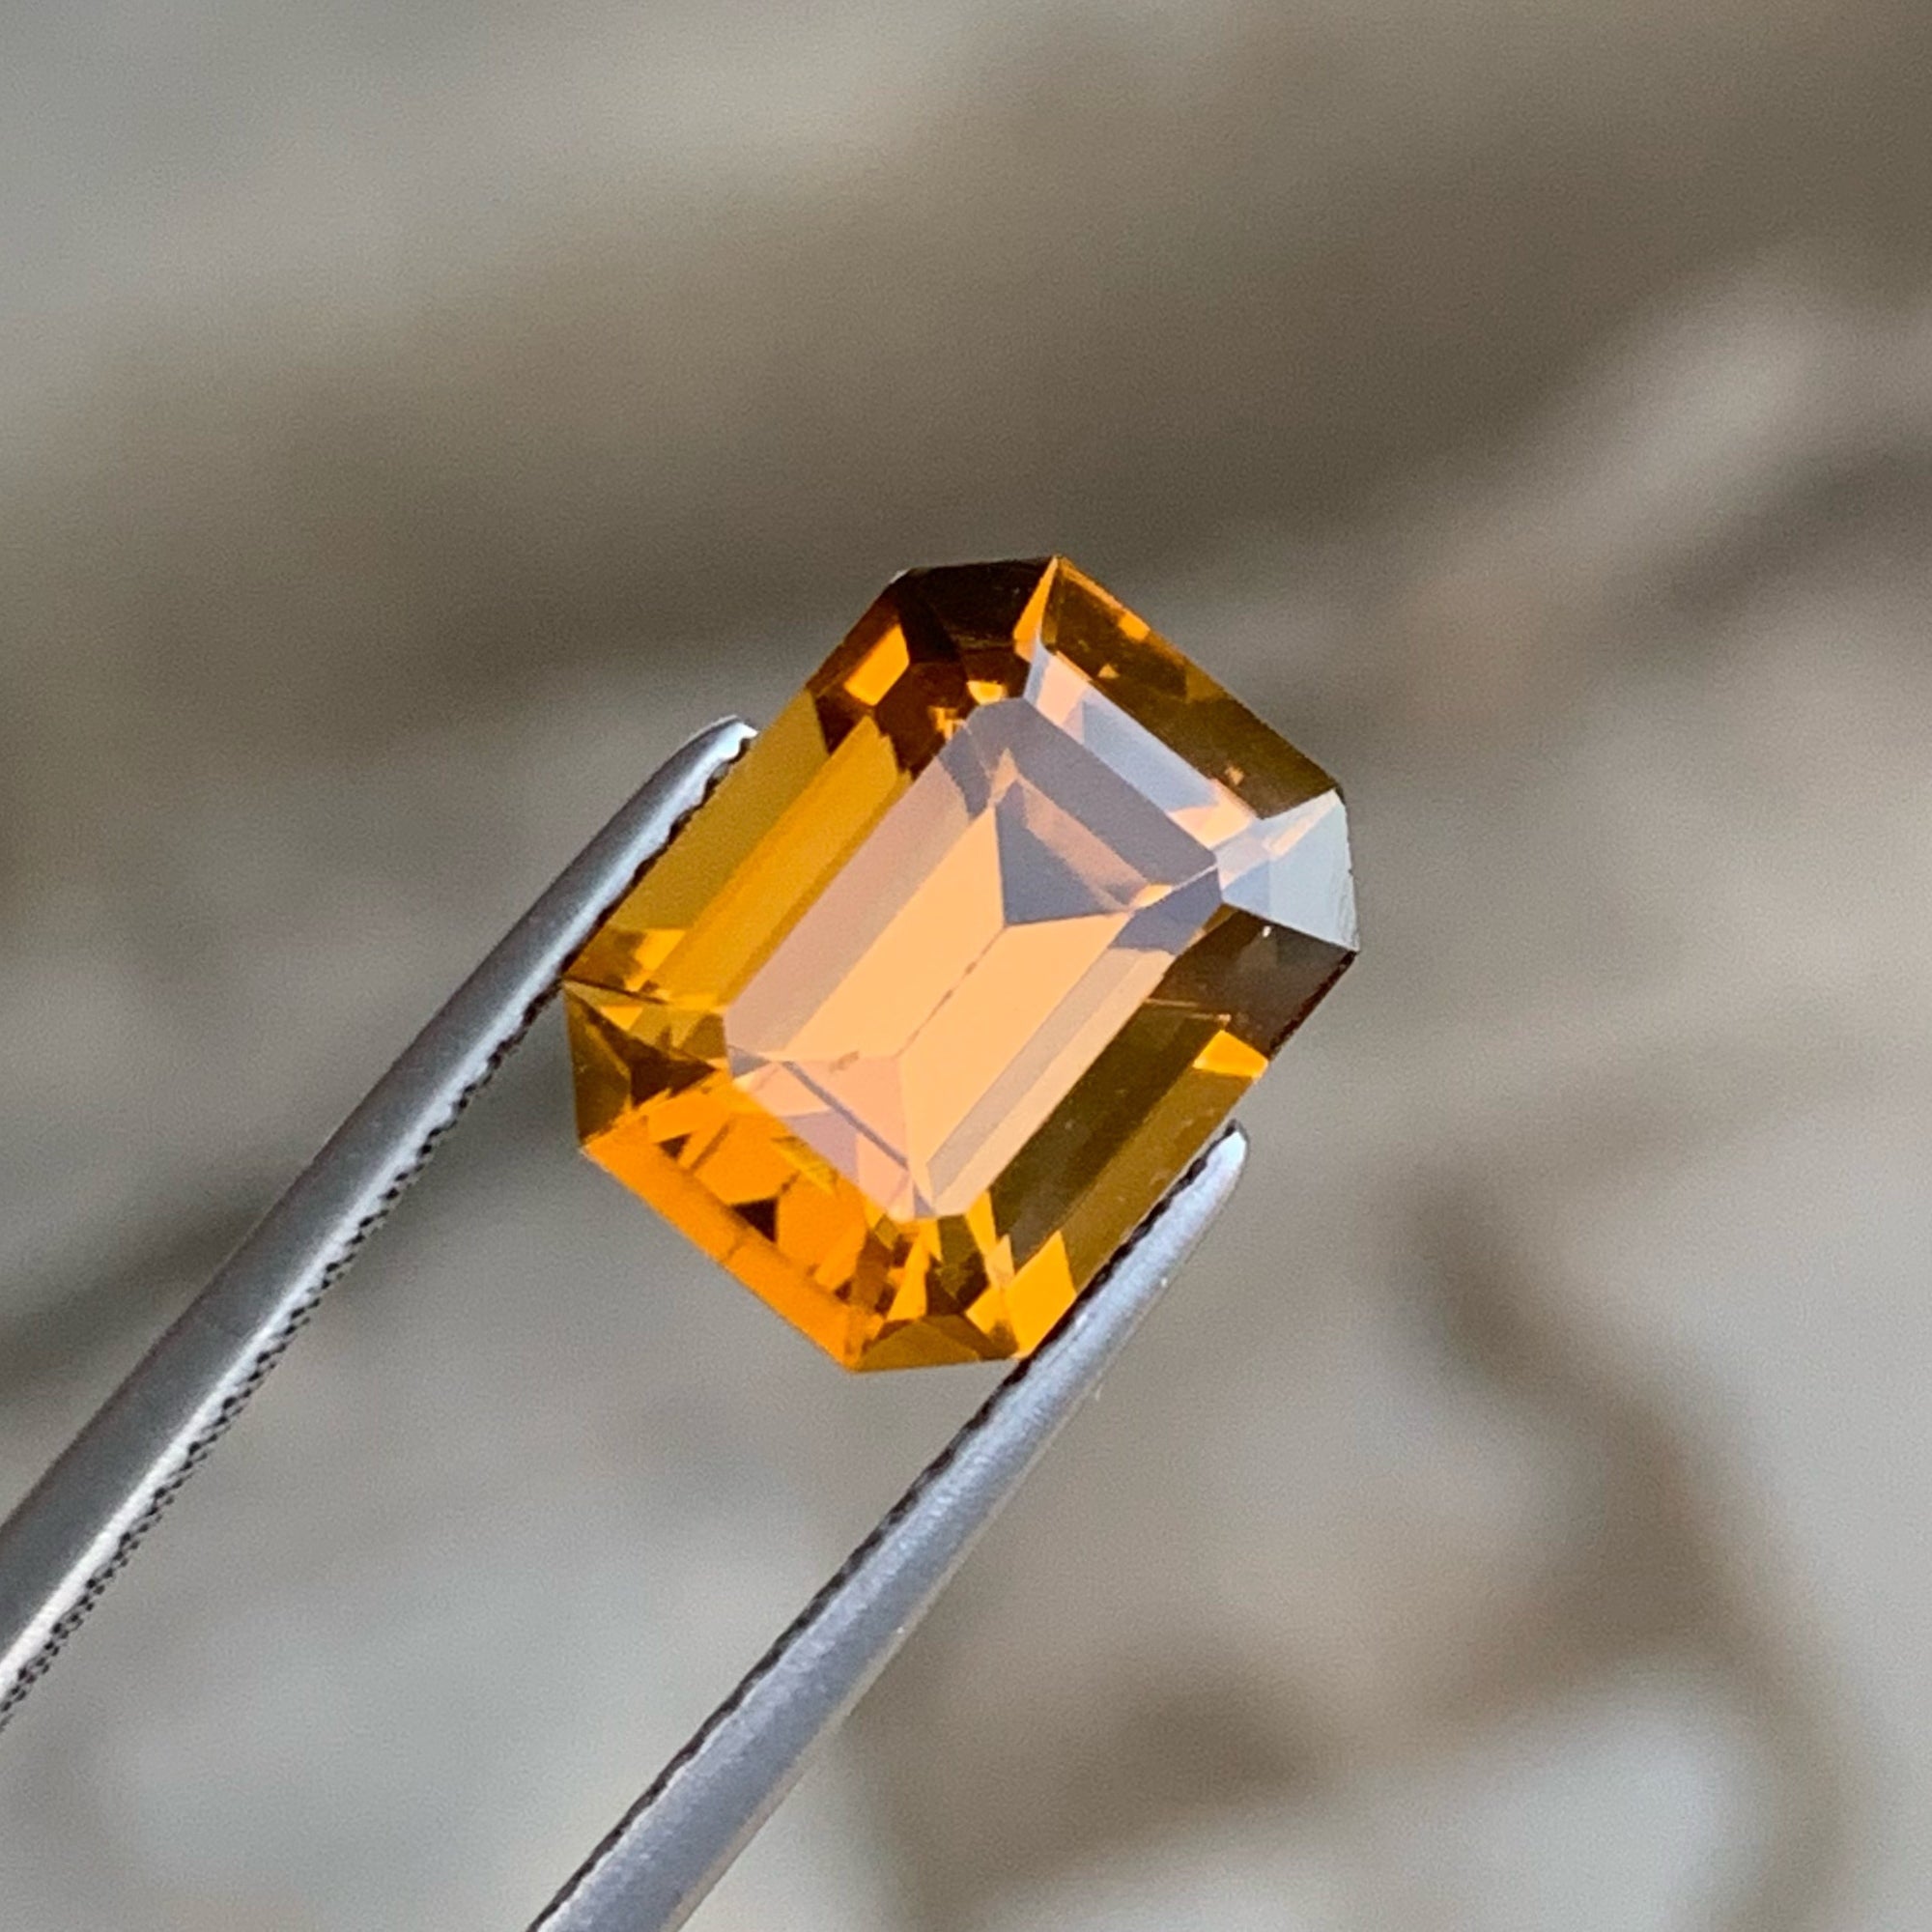 Precise Emerald Cut Honey Citrine Stone, Available for sale at whole sale price natural high quality 4.80 Carats Loupe Clean Loose Citrine From Brazil.

Product Information:
GEMSTONE TYPE: Precise Emerald Cut Honey Citrine Stone
WEIGHT: 4.80